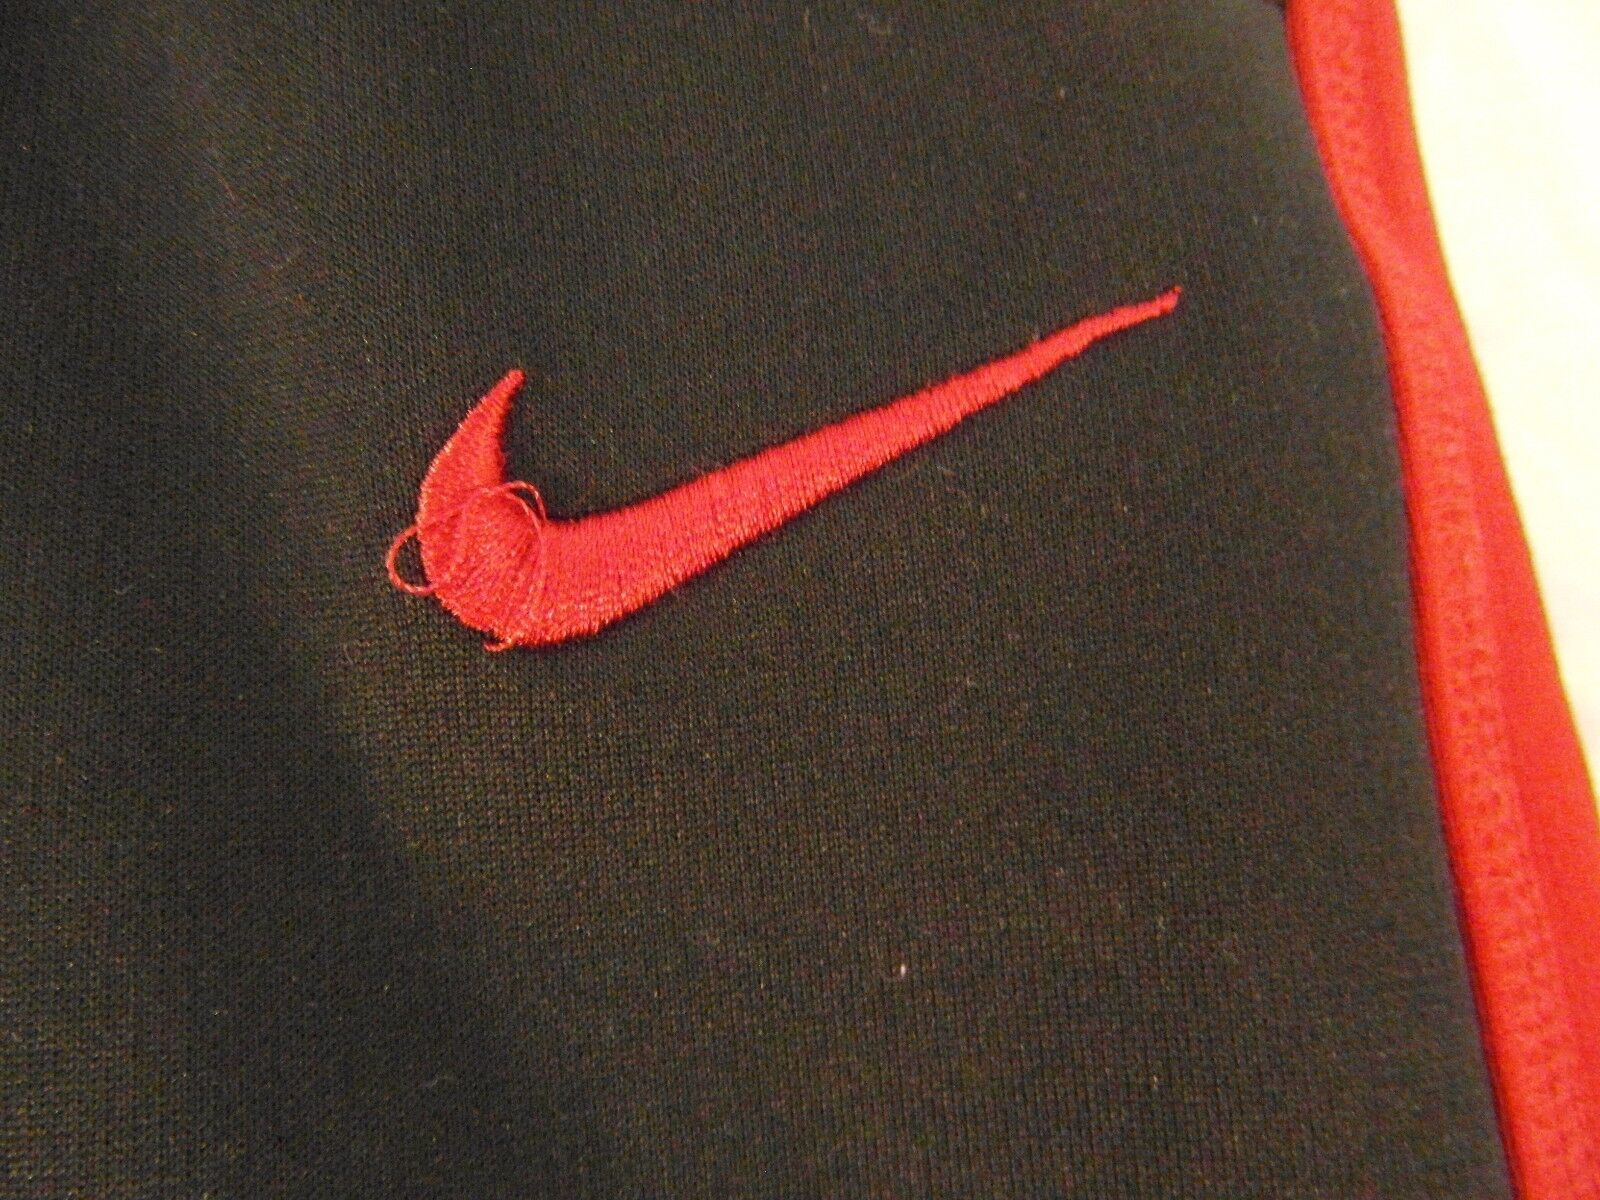 Primary image for YOUTH BOYS NIKE THERMA FIT ATHLETIC SPORTS TRACK PANTS RED BLACK MEDIUM